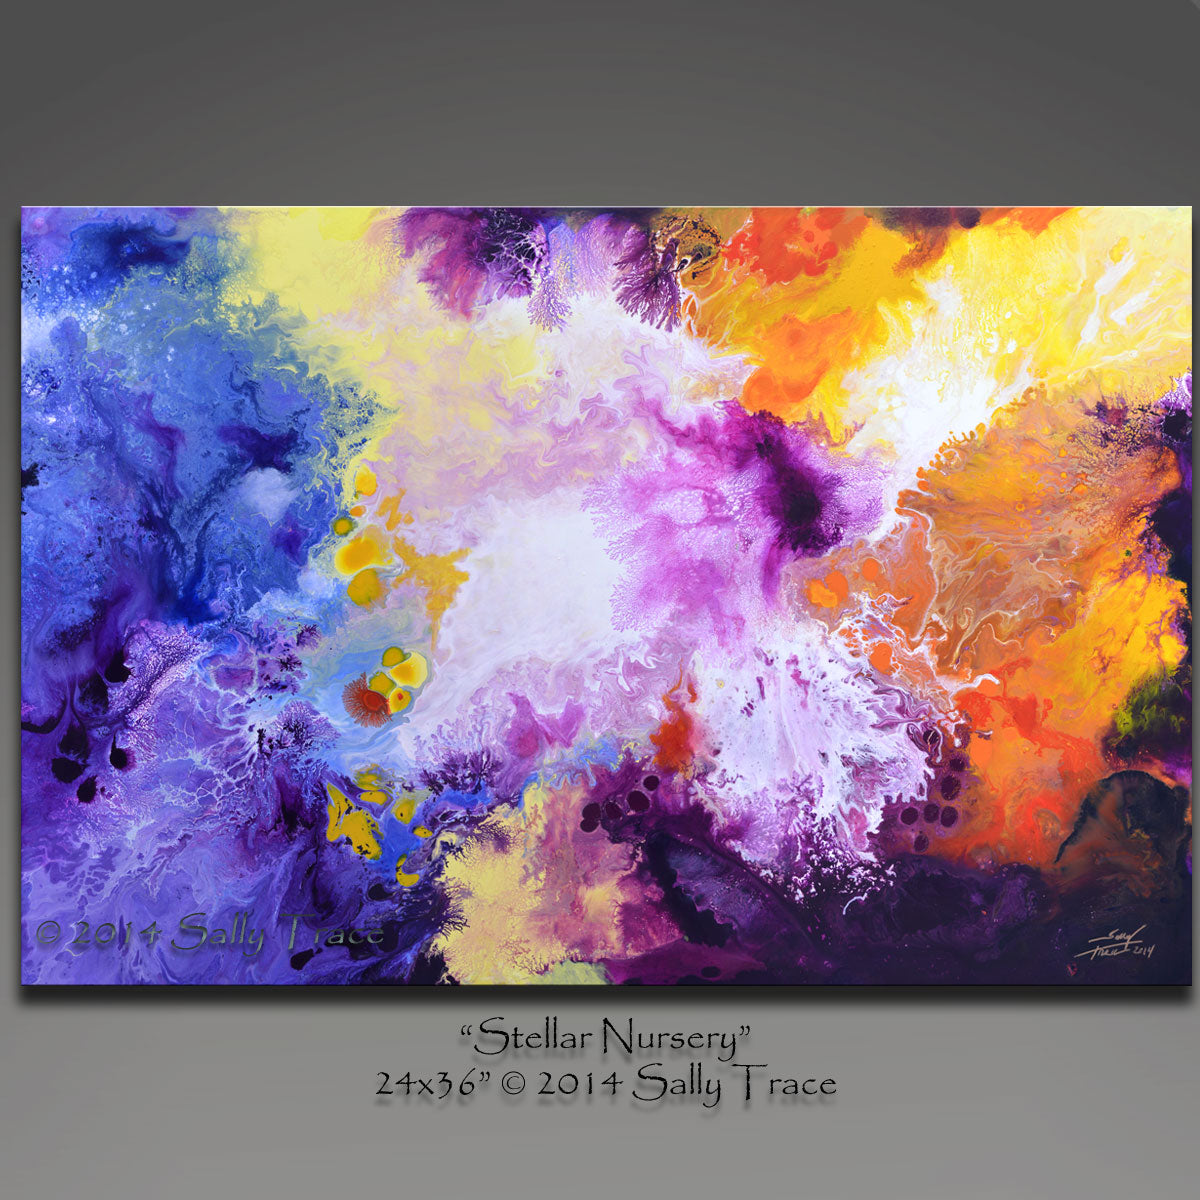 Stellar Nursery, giclee prints from my abstract, fluid original painting by Sally Trace